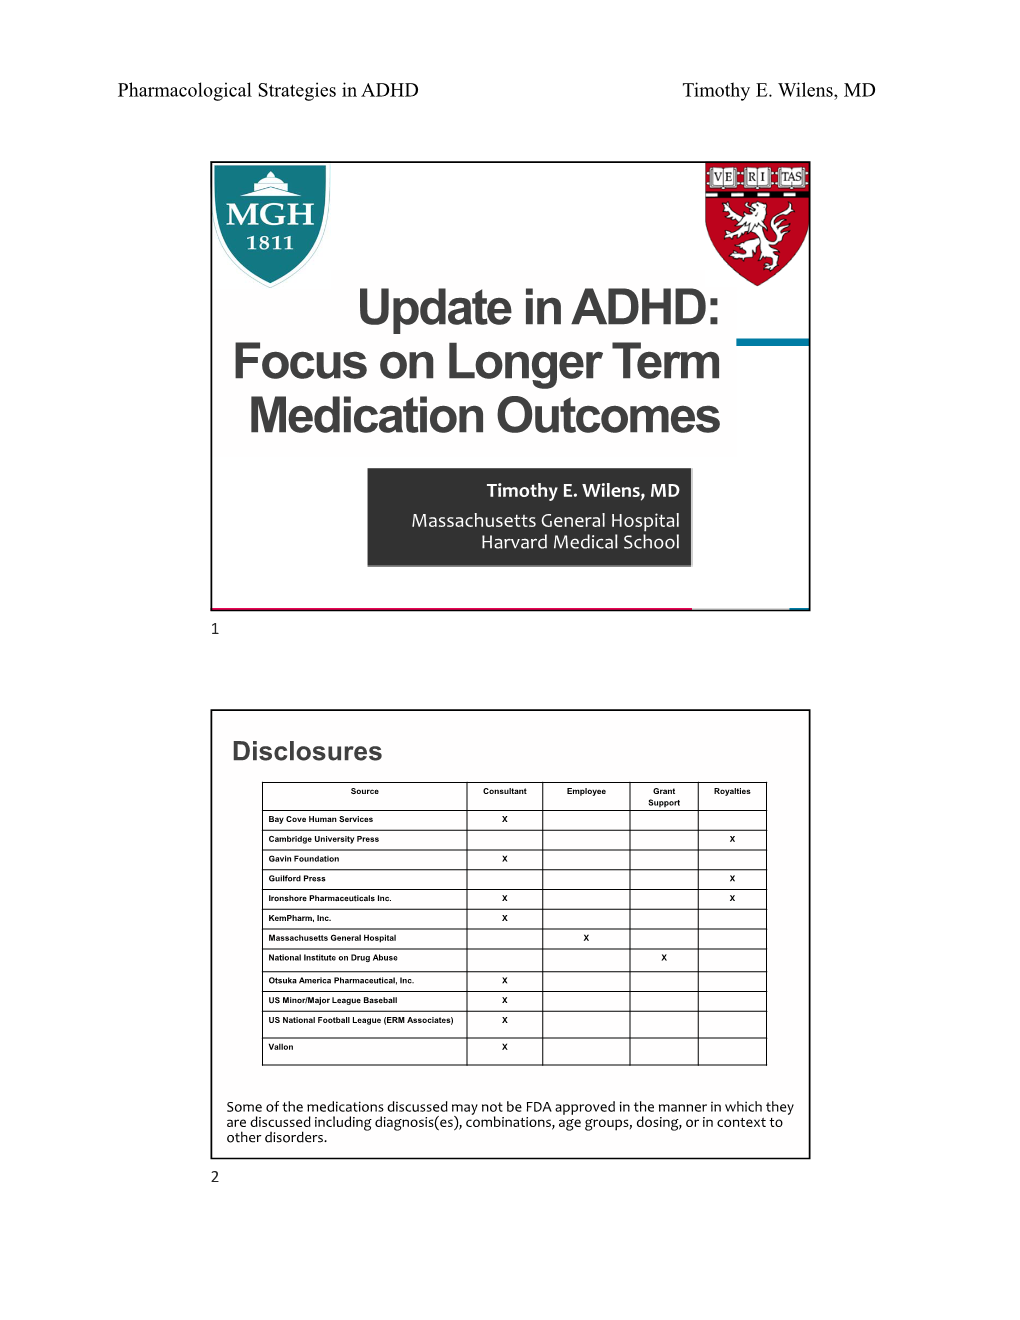 Update in ADHD: Focus on Longer Term Medication Outcomes